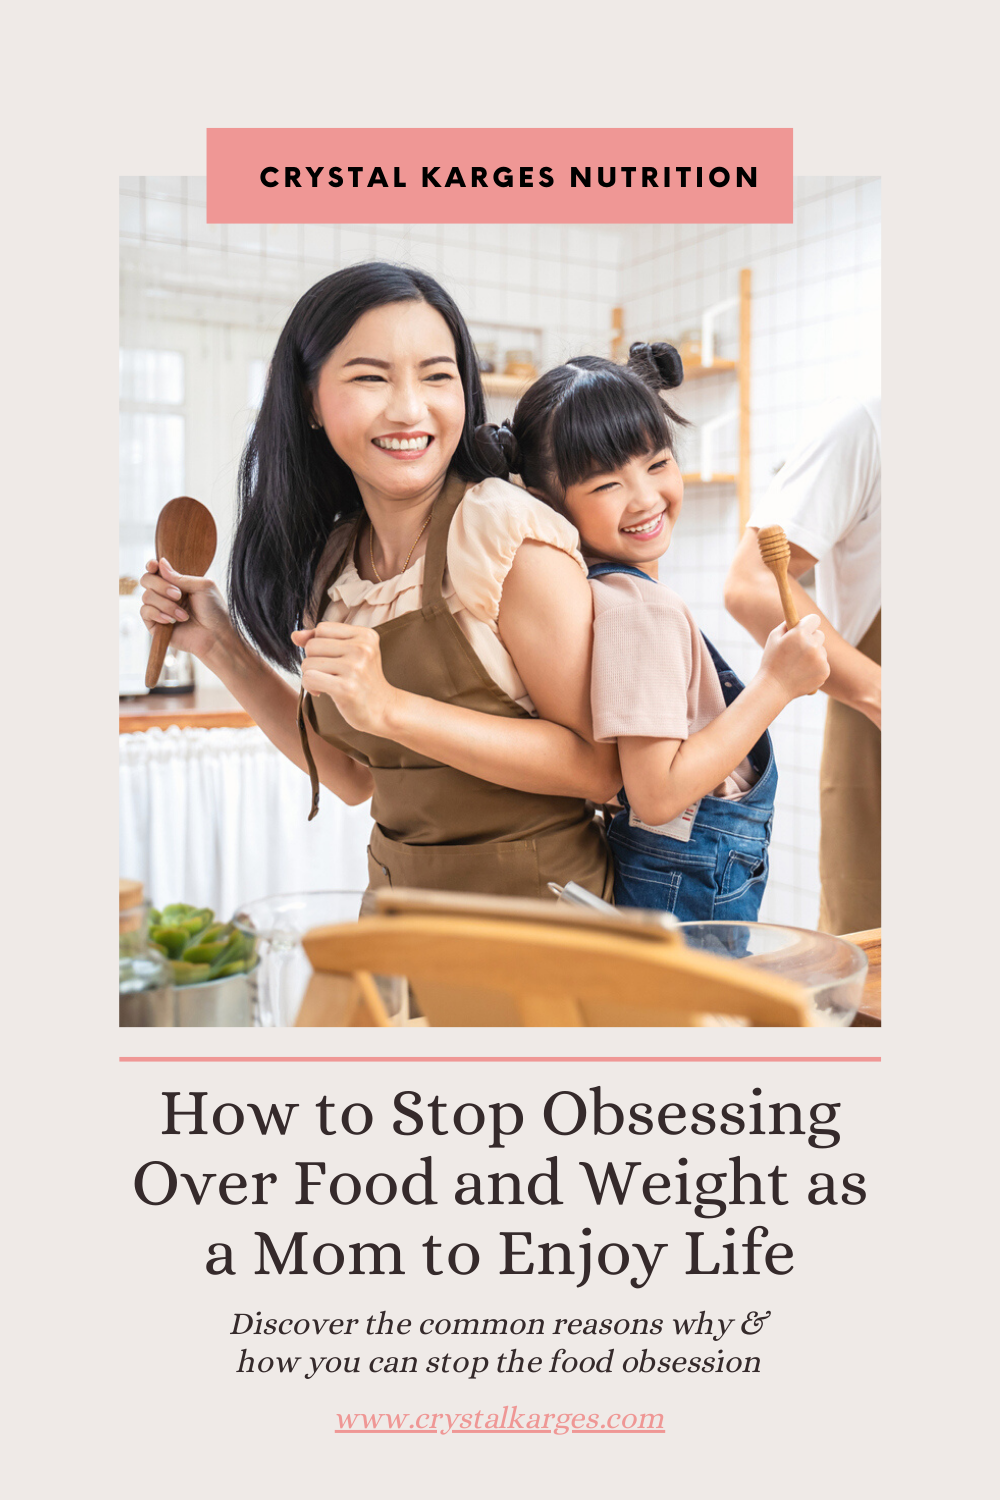 How to Stop Obsessing Over Food and Weight as a Mom to Enjoy Life 1.png